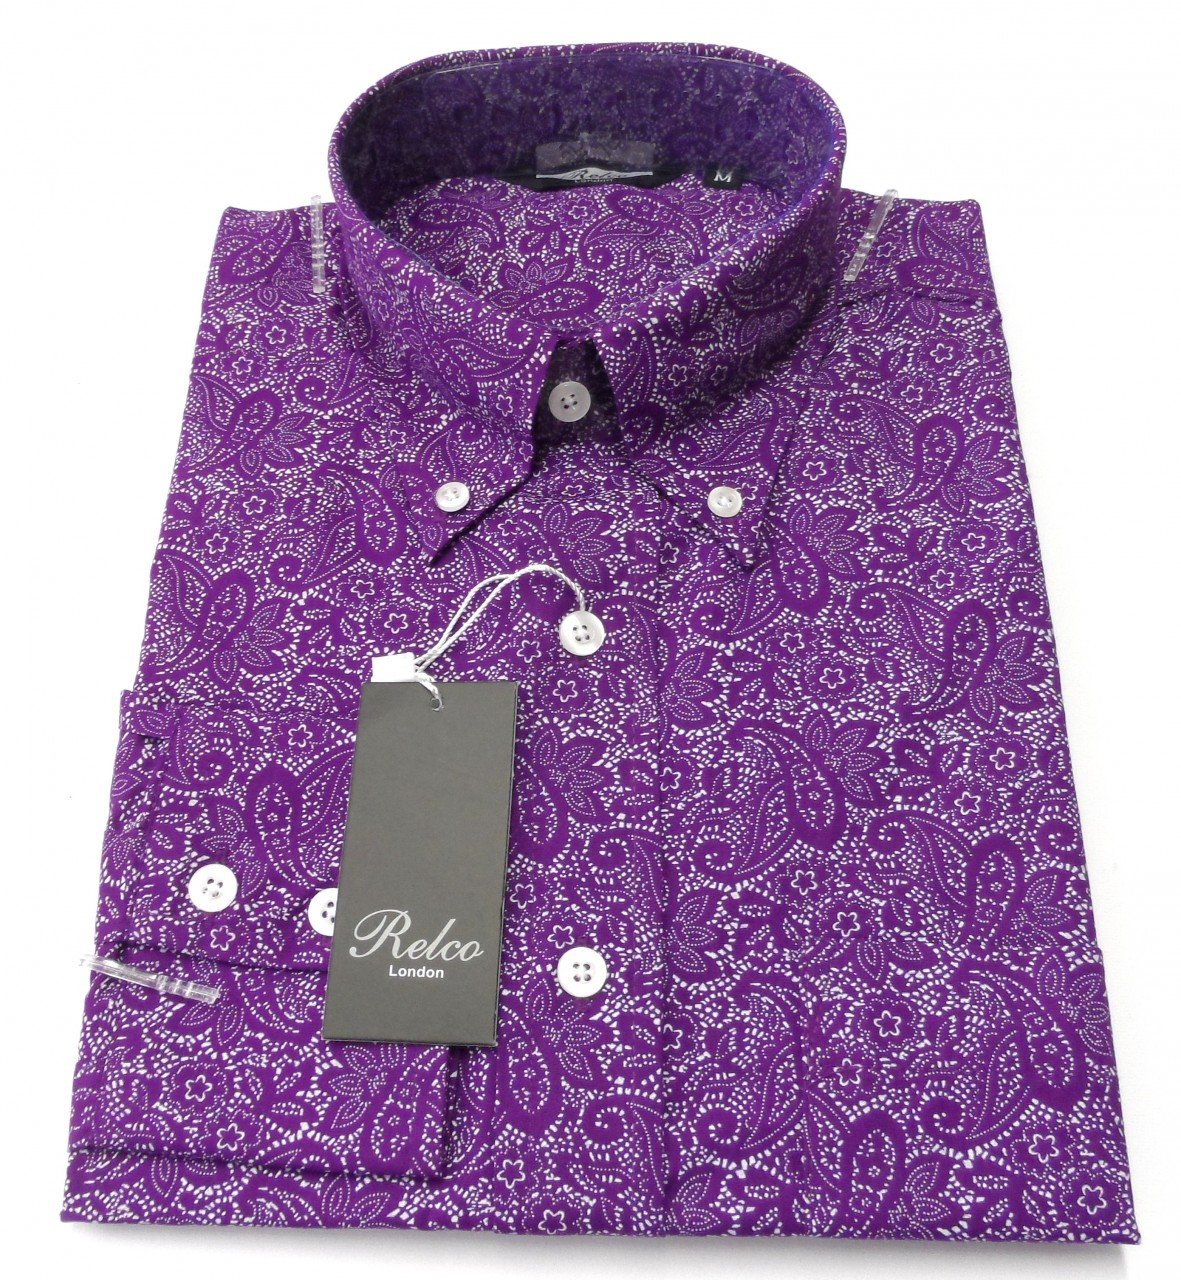 Purple Paisley Shirt - Relco Long Sleeved Retro Mod Button Down